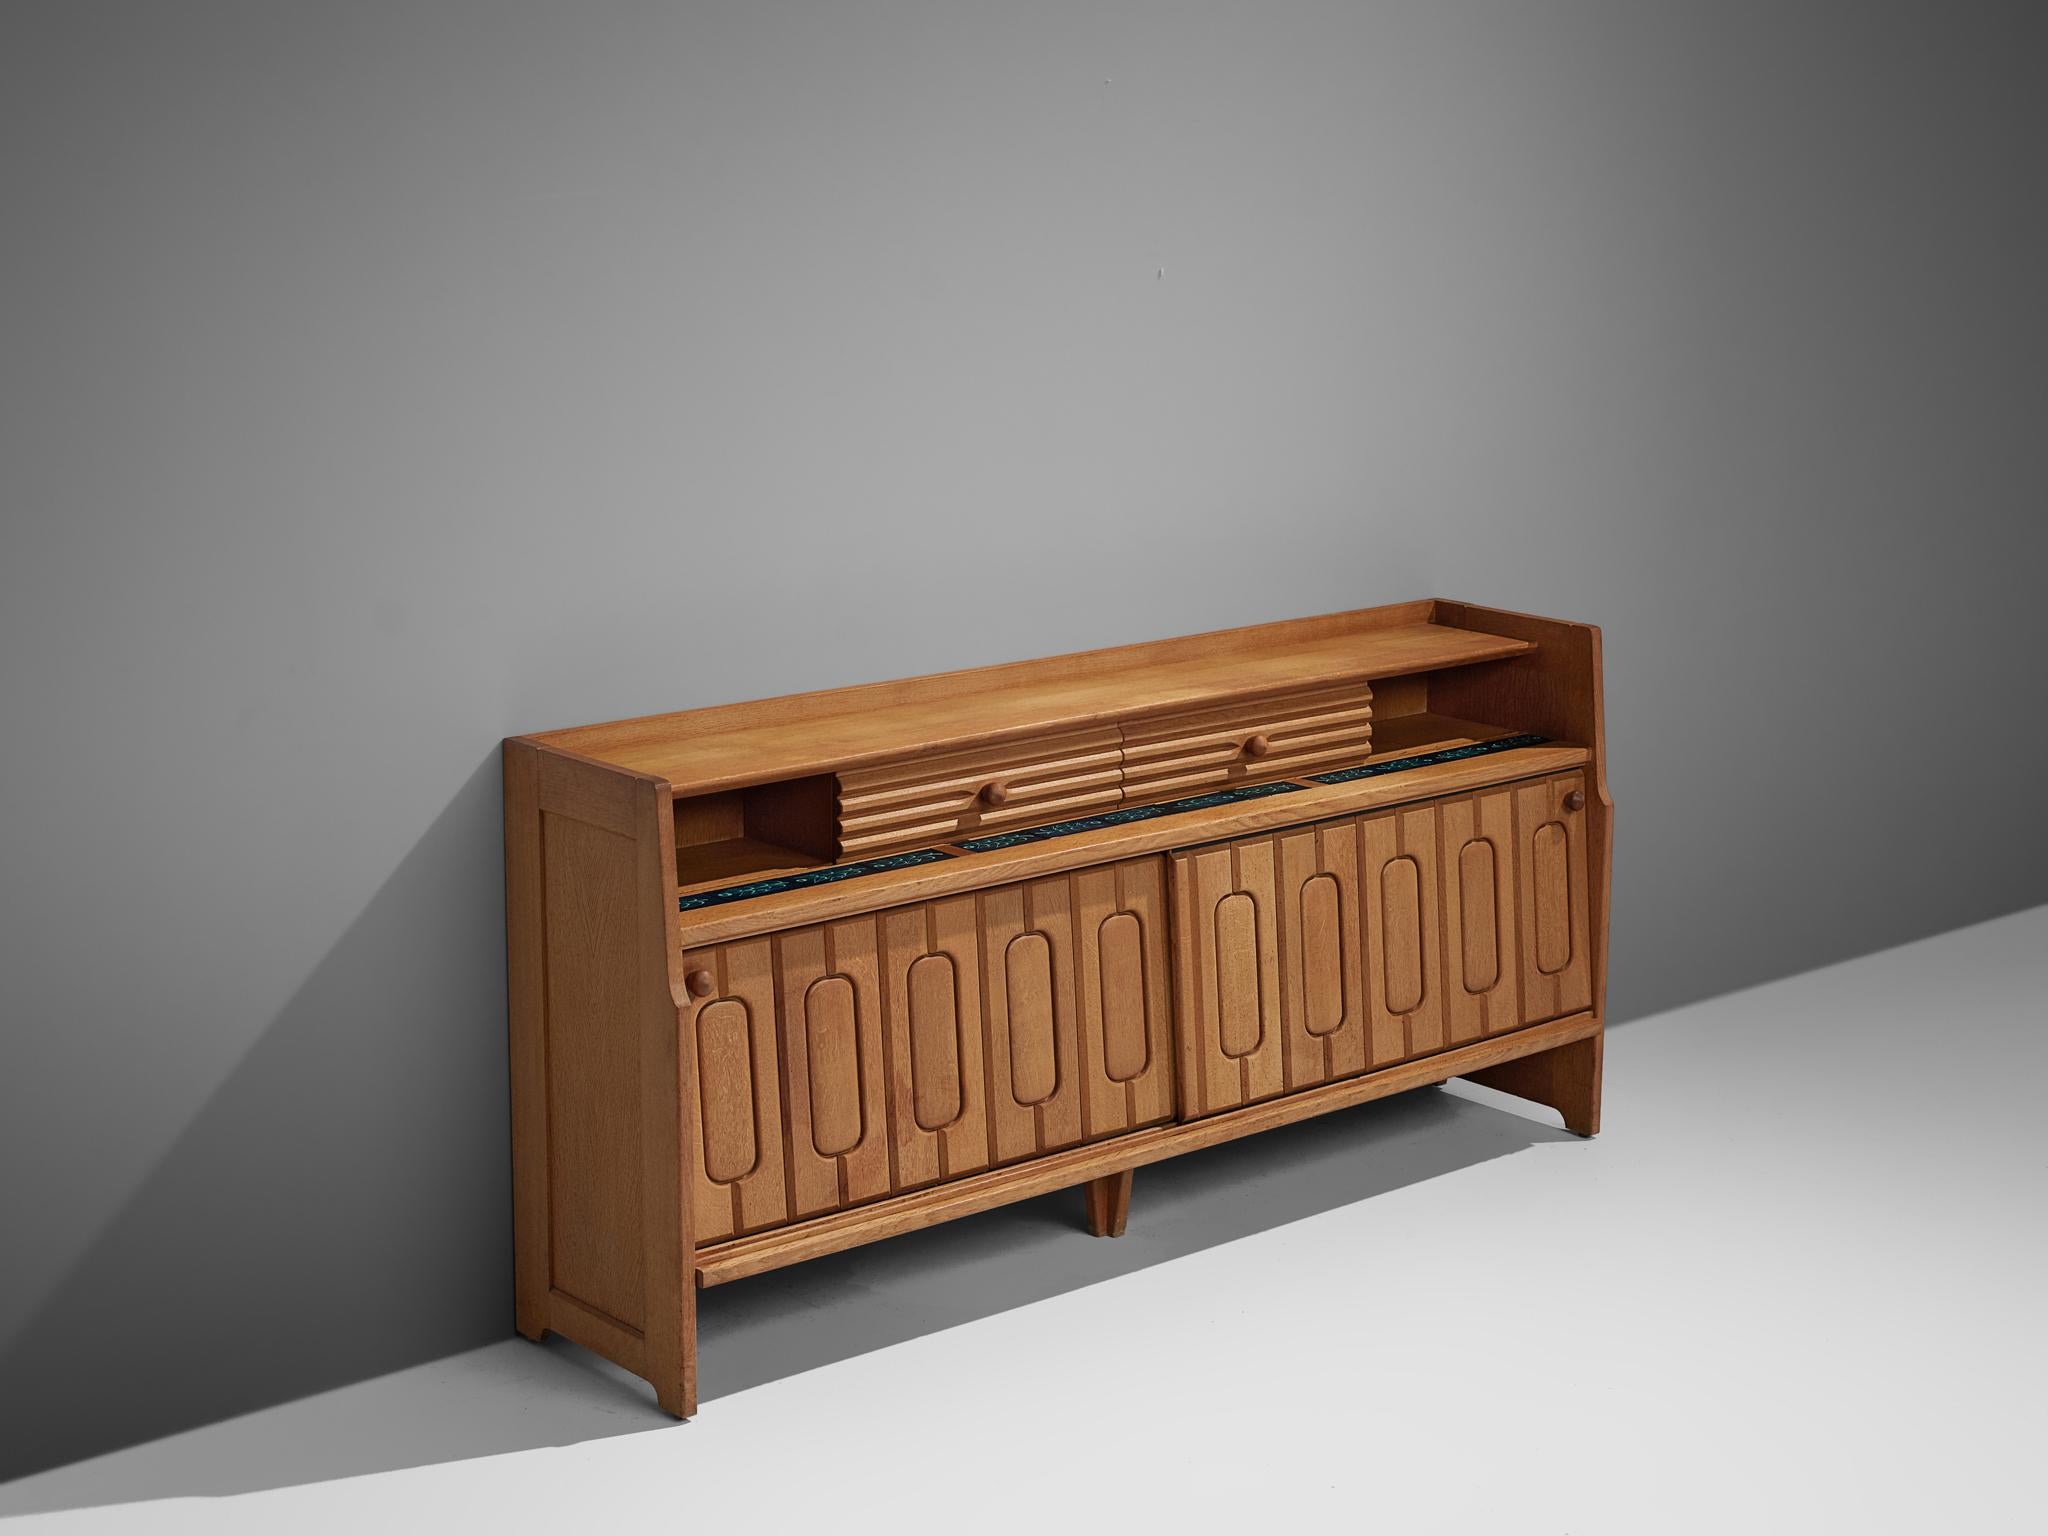 Guillerme et Chambron for Votre Maison, sideboard, oak, ceramic, France, 1960s

Credenza in oak by French designer duo Guillerme & Chambron. This sideboard is equipped with two sliding-doors below, and the upper part contains two smaller sliding